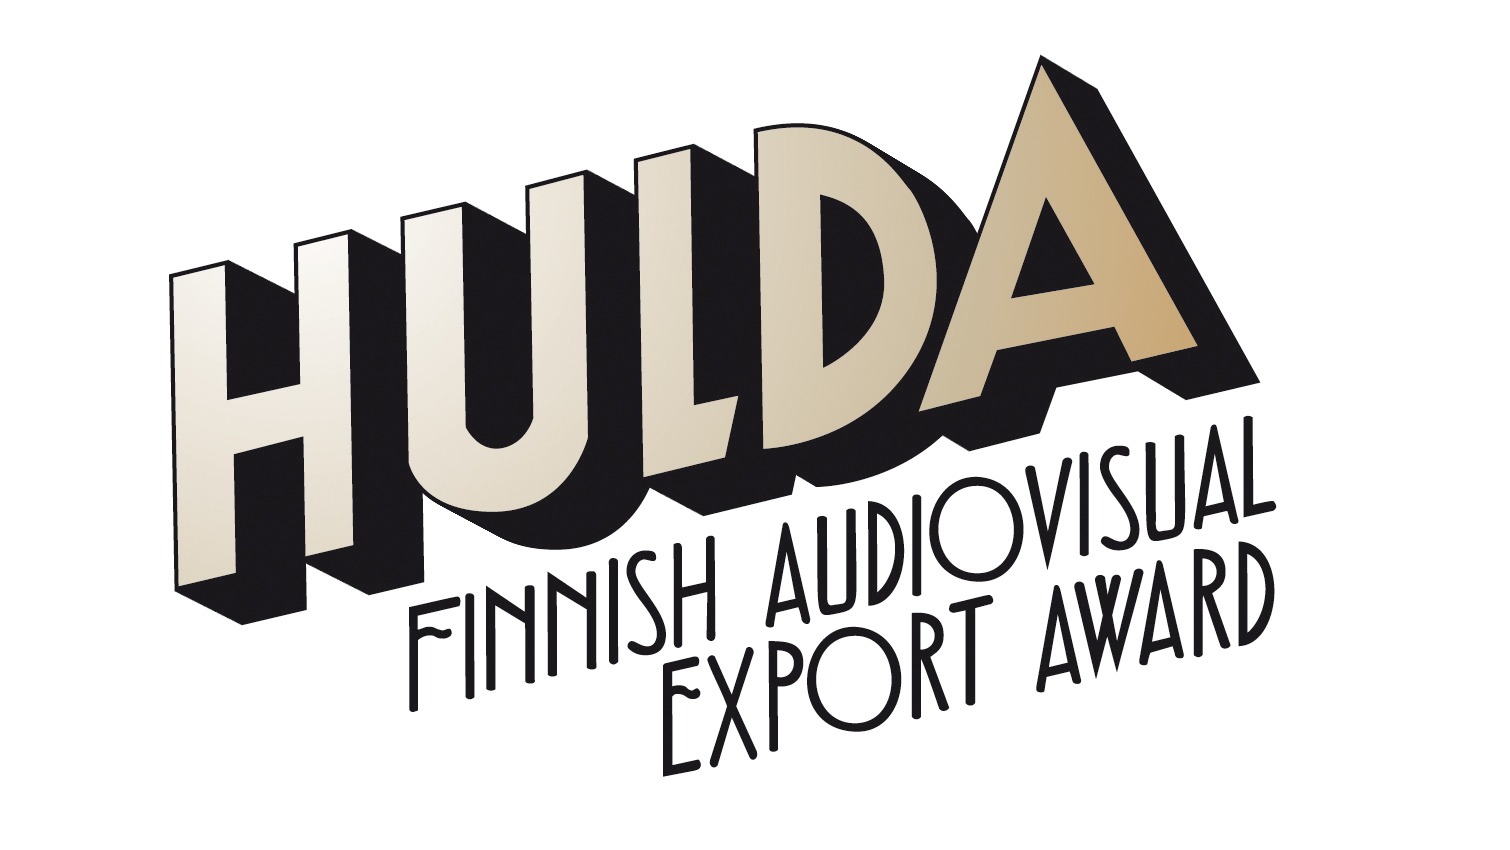 The Birds Movie Logo - Rovio Entertainment and Mikael Hed recognized with Hulda Award